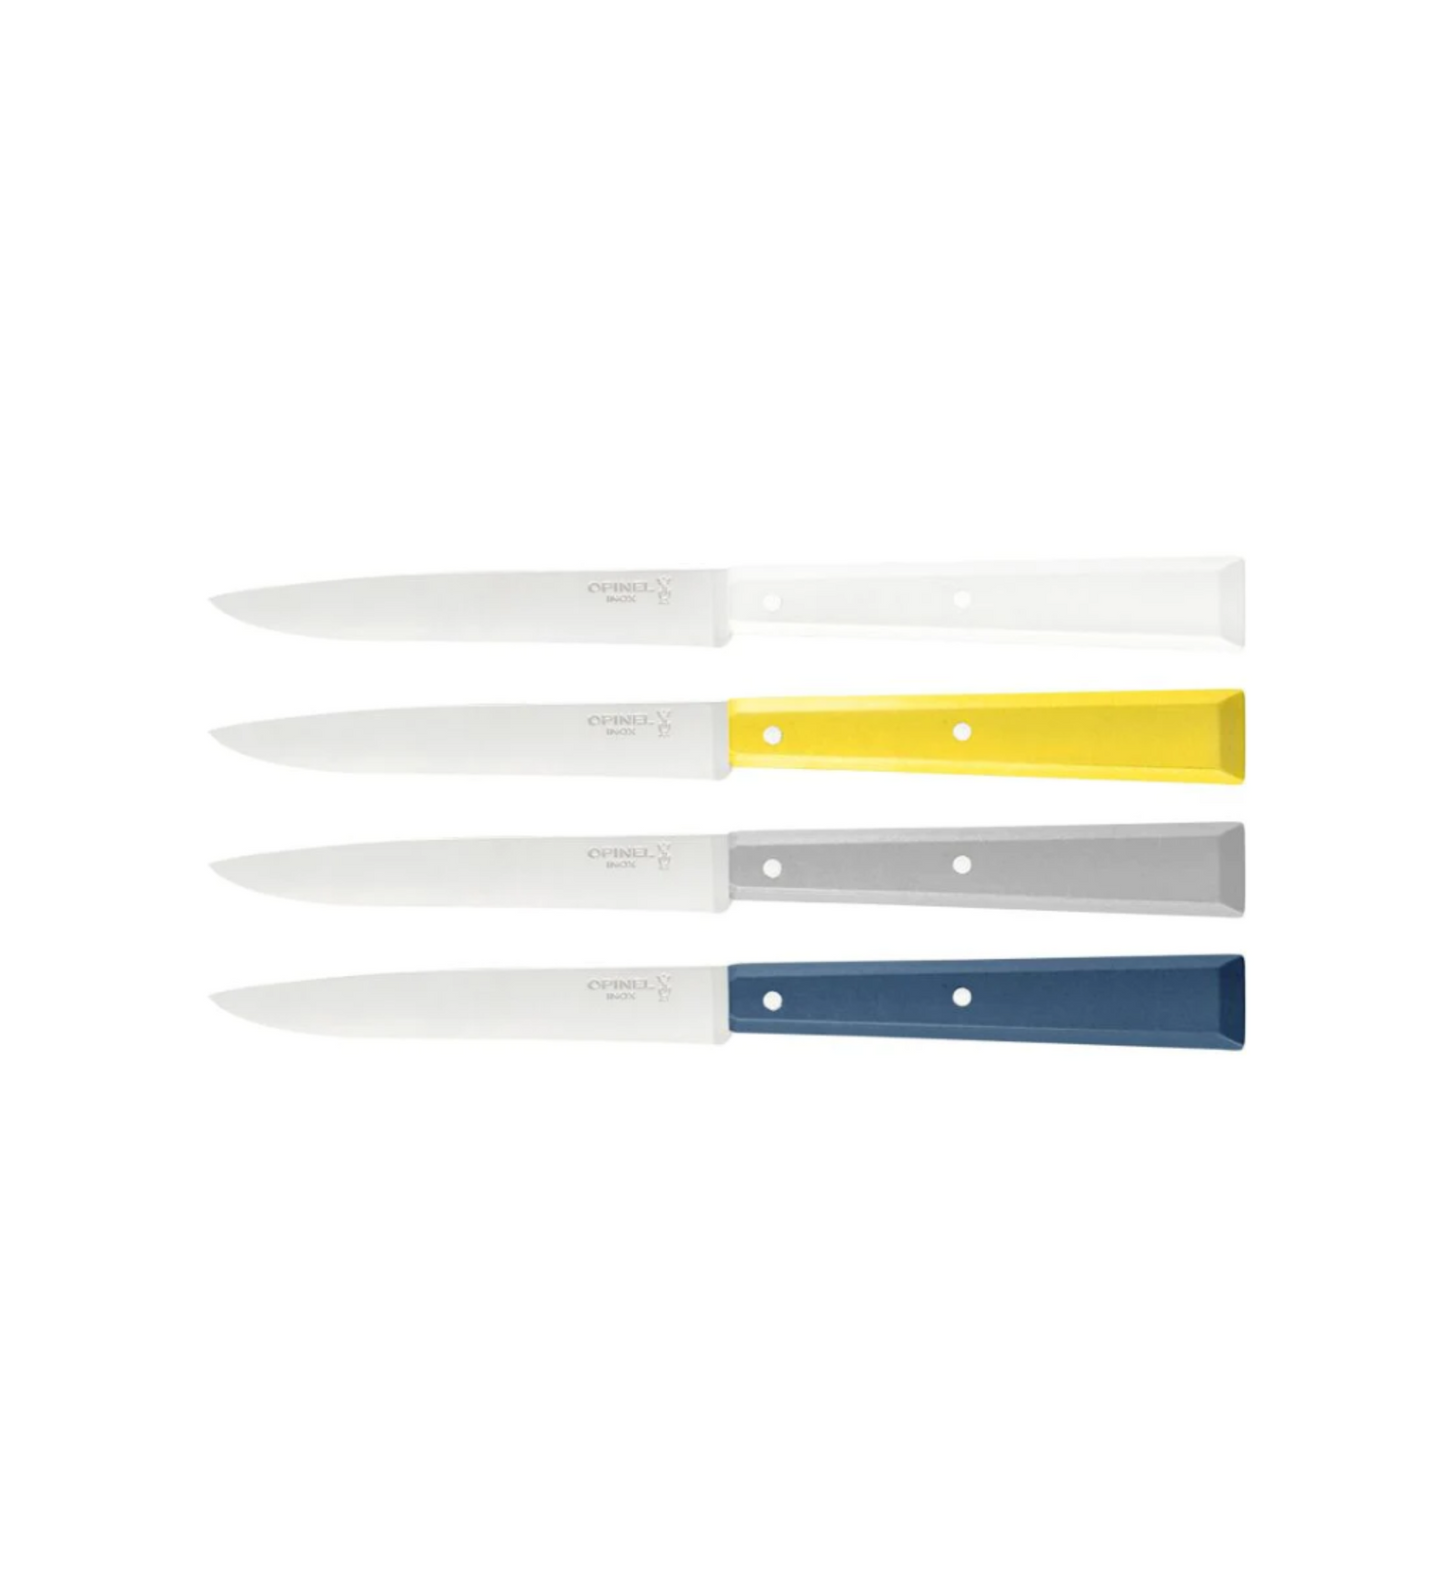 Box of 4 table knives  - Opinel